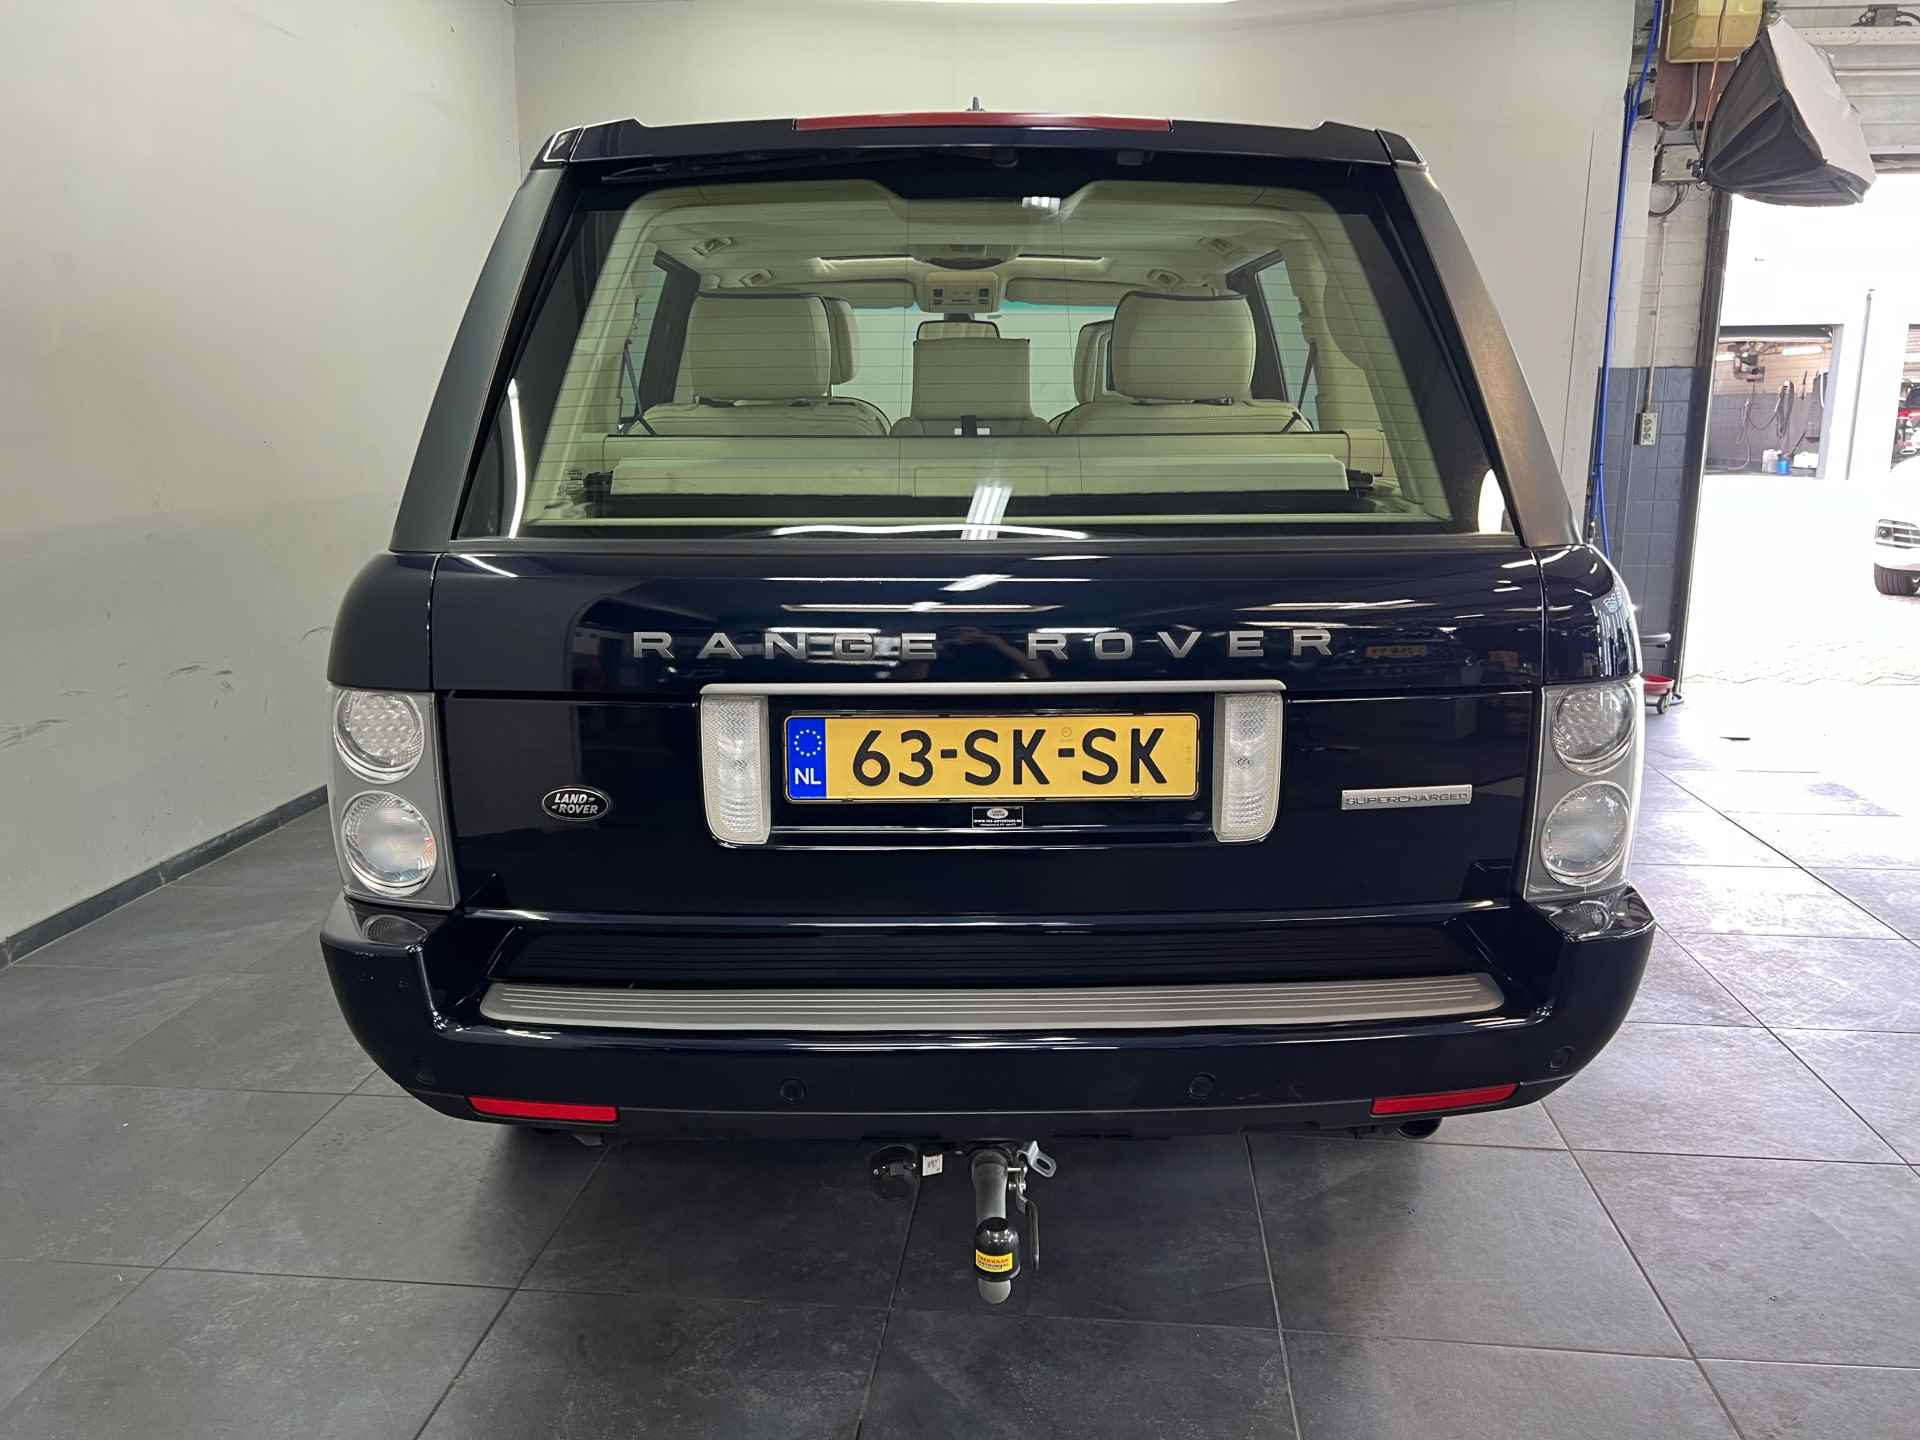 Land Rover Range Rover 4.2 V8 Supercharged ✅UNIEKE STAAT✅Airco✅Cruise controle✅Navigatie✅5 deurs✅TREKHAAK - 17/52